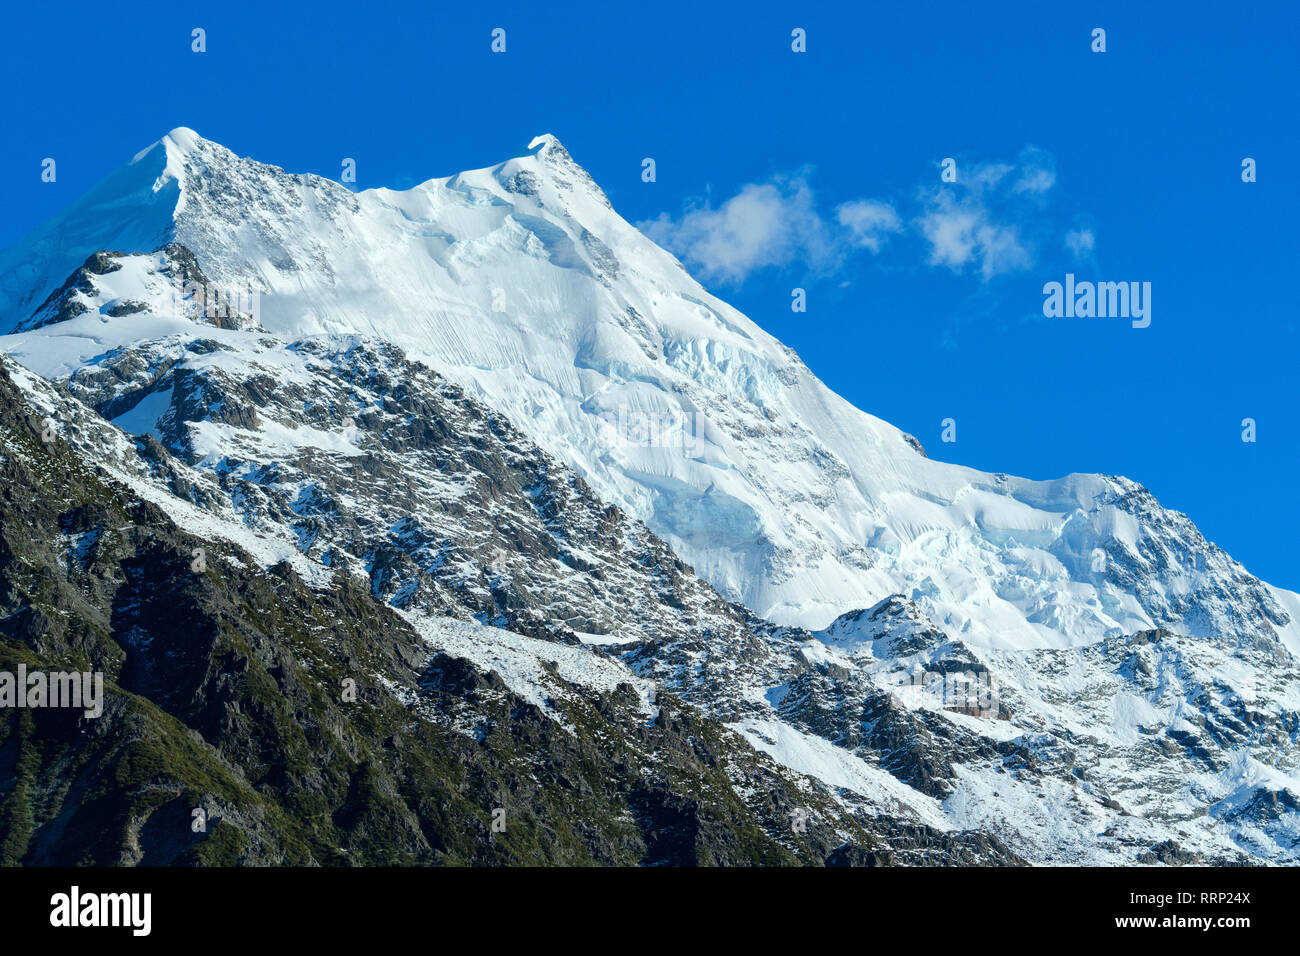 Oceania, New Zealand, Aotearoa, South Island, Southern Alps,  Mount Cook, Mount Cook National Park, Stock Photo